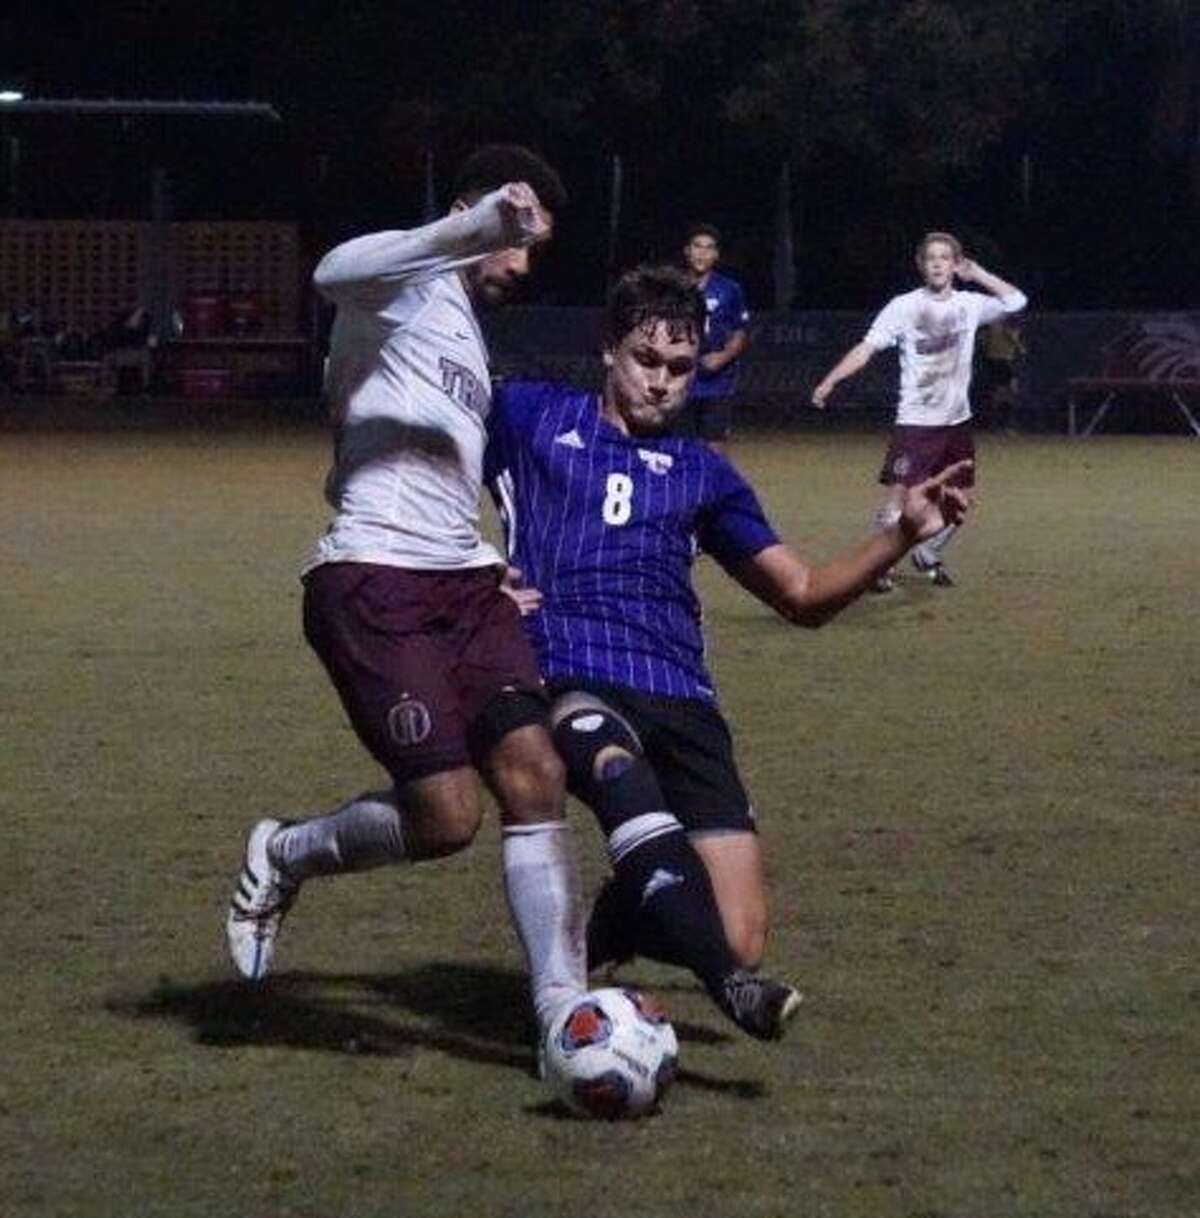 Mary Hardin-Baylor soccer player Logan Keeler, a Montgomery alum, and Trinity University's Wesley Mitchell, a The Woodlands alum, battle for the ball this past Saturday night in San Antonio.